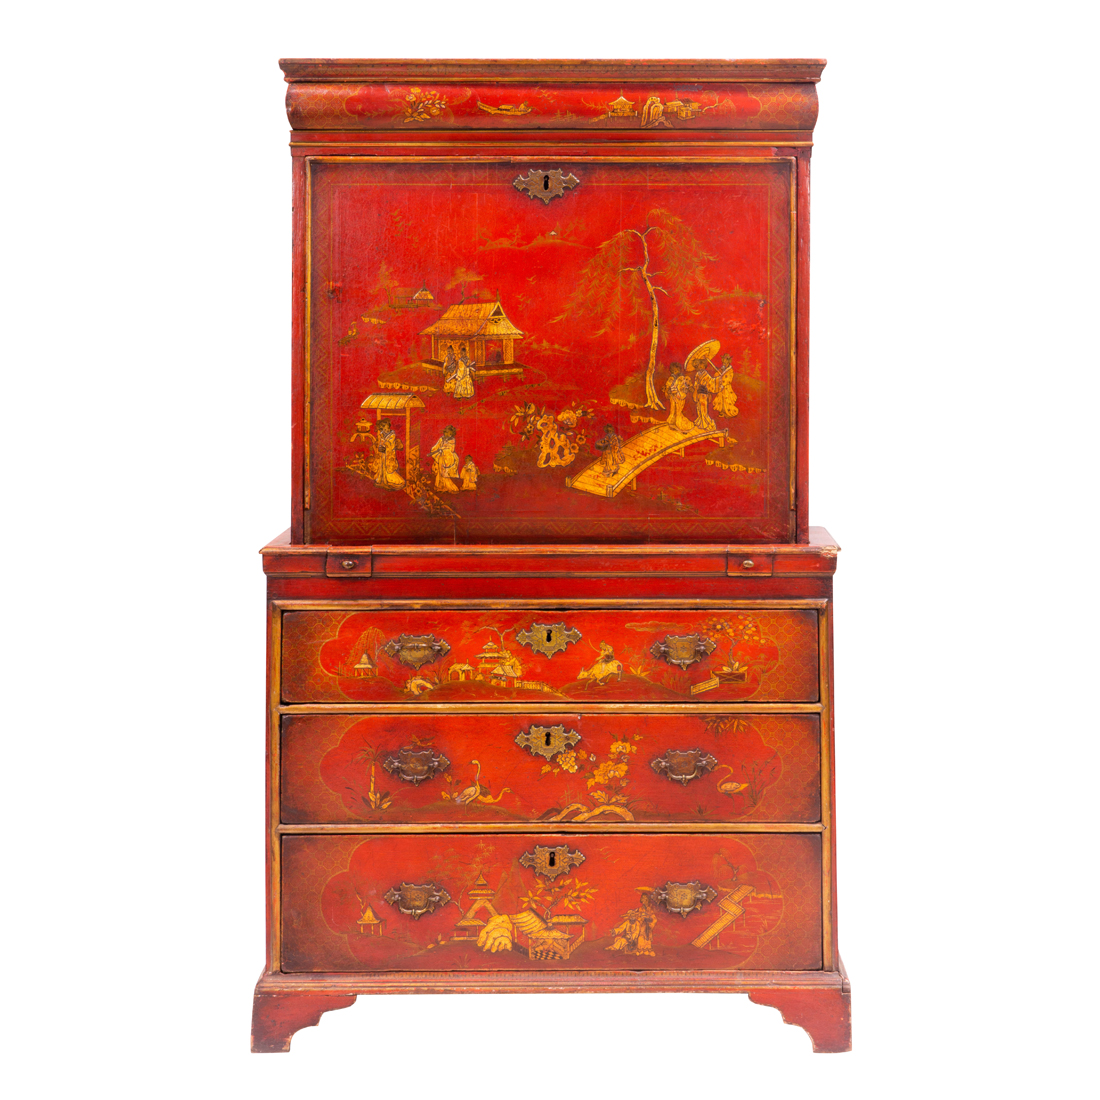 GEORGIAN RED LACQUER JAPANNED SECRETAIRE